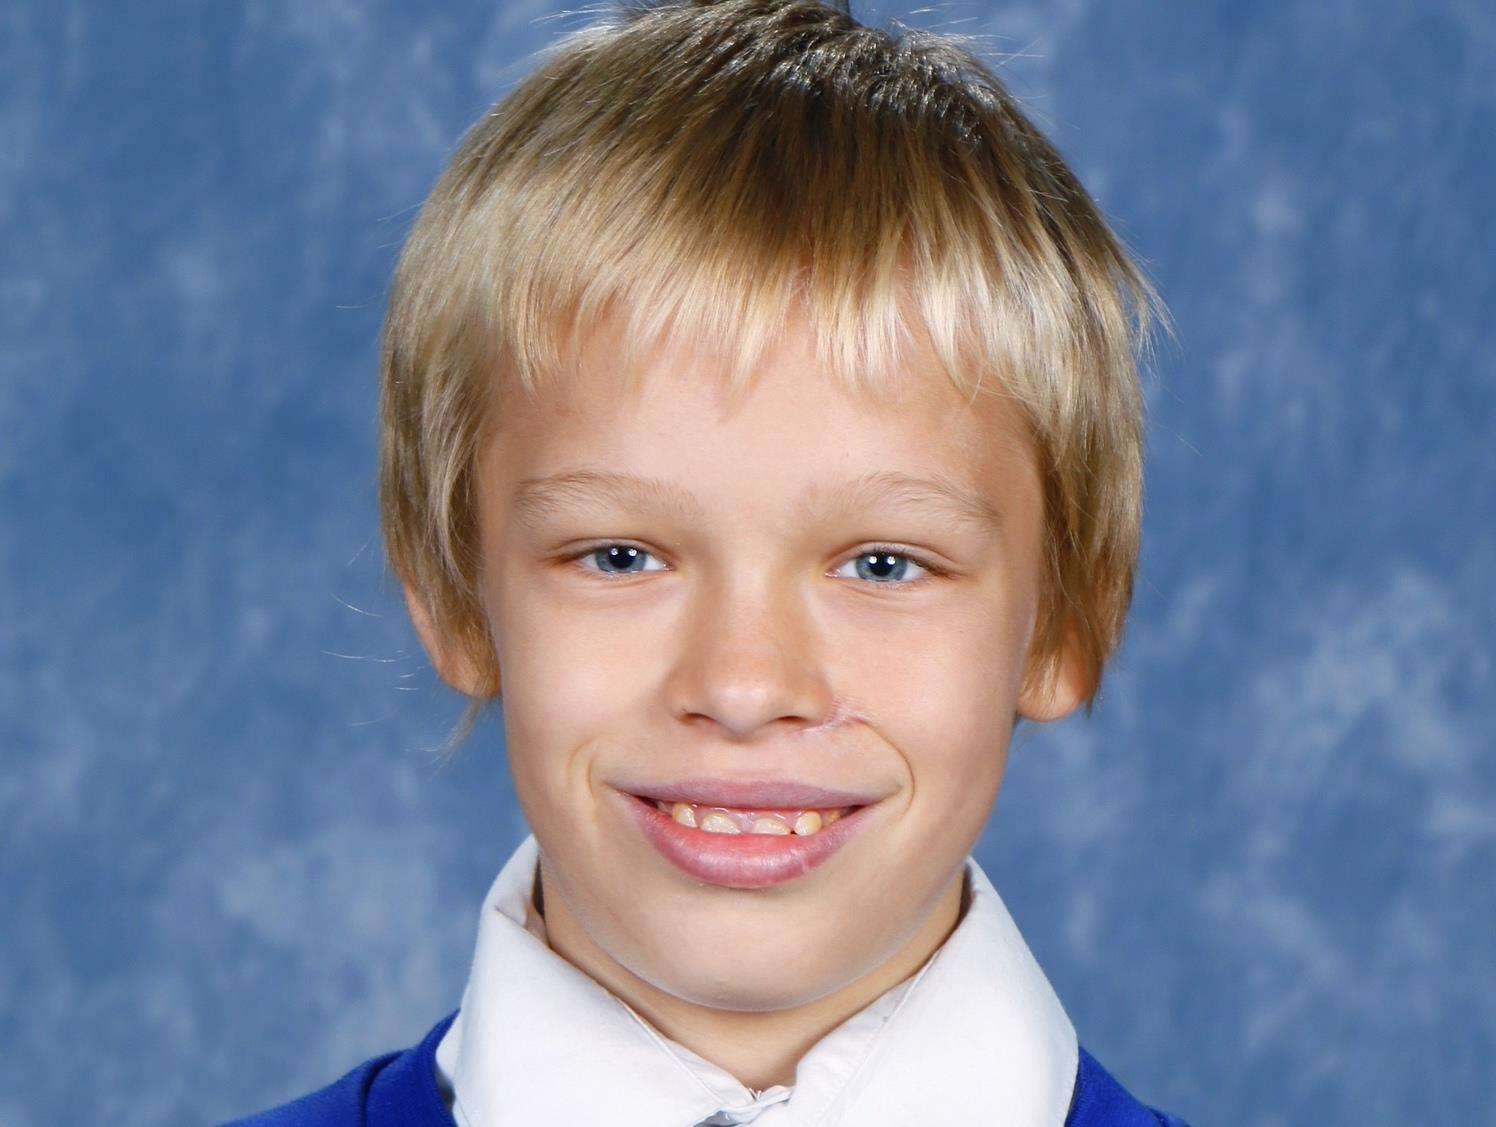 Tributes have been paid to Mathew Stollery, who died aged 11